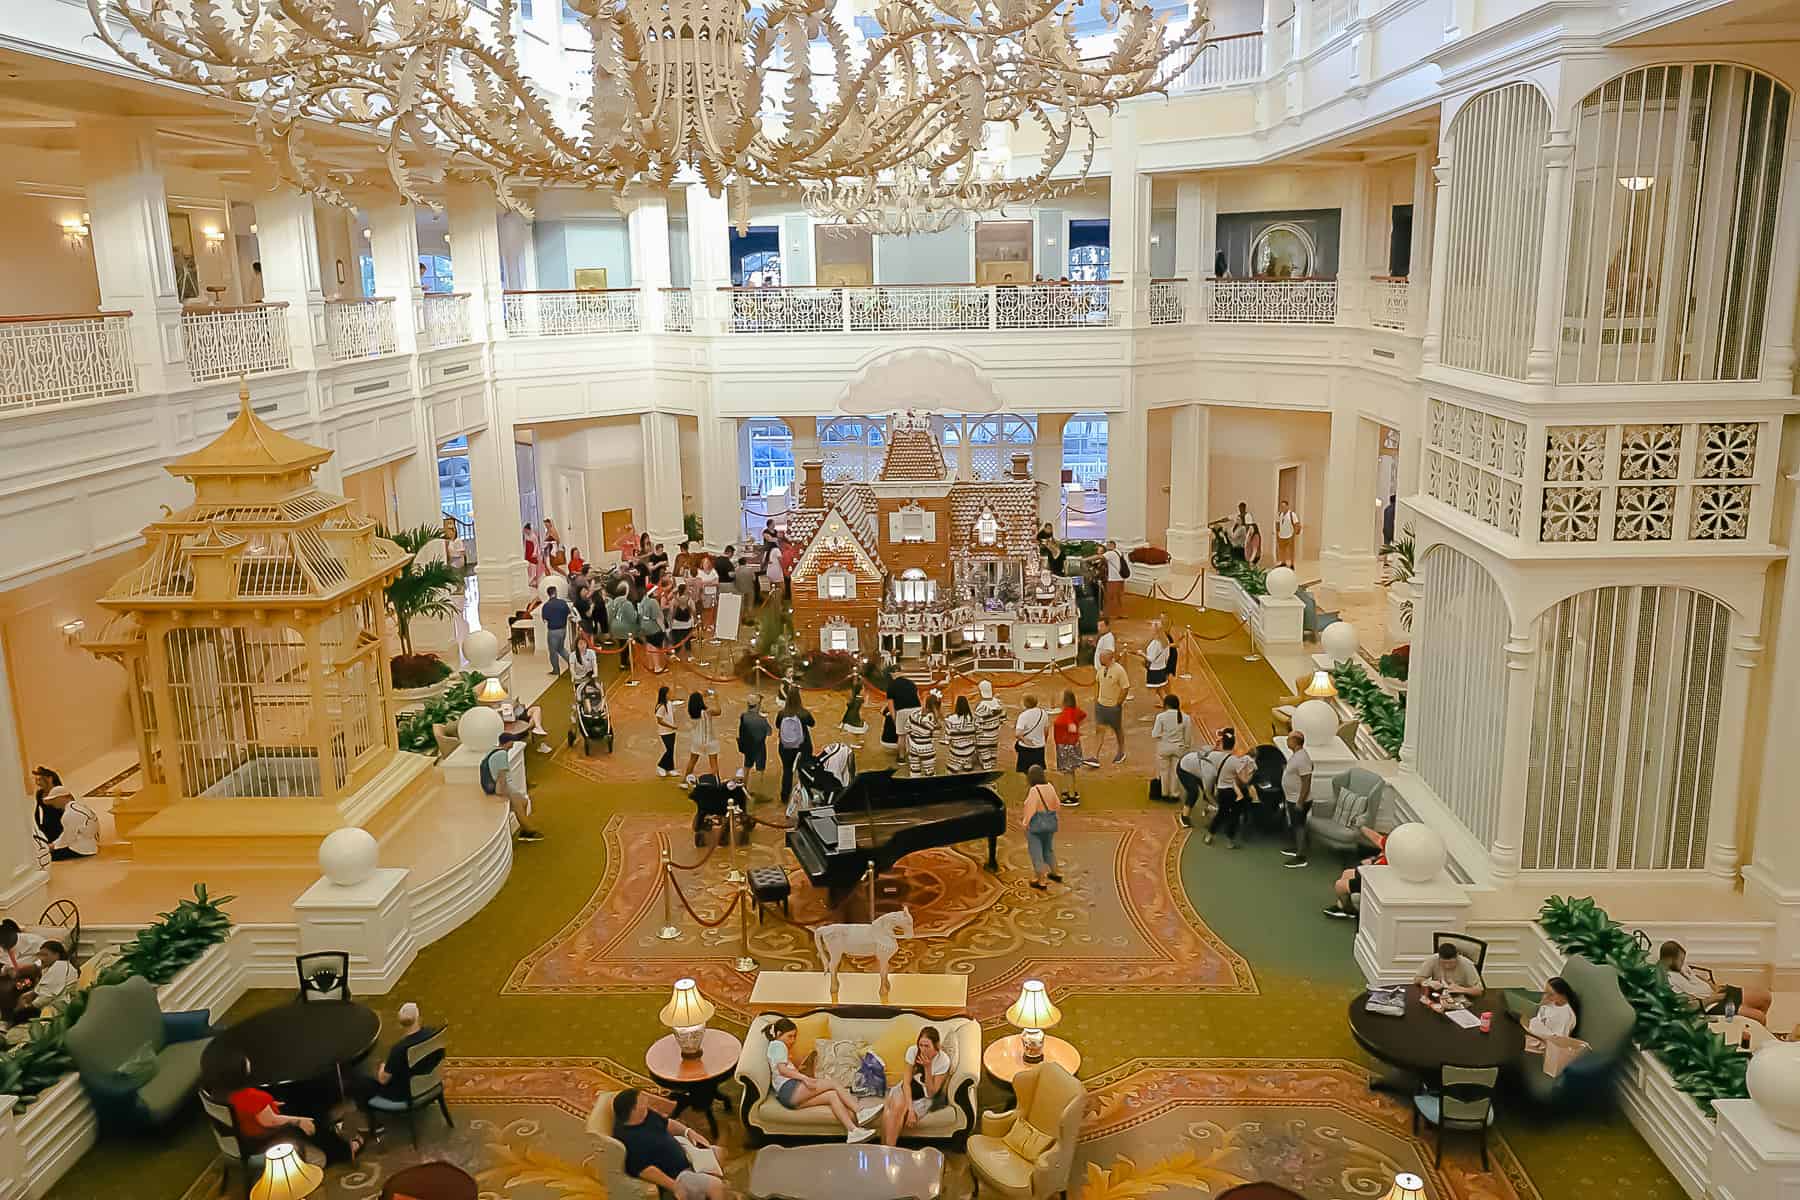 view of the gingerbread house and lobby at Disney's Grand Floridian from the second-floor 